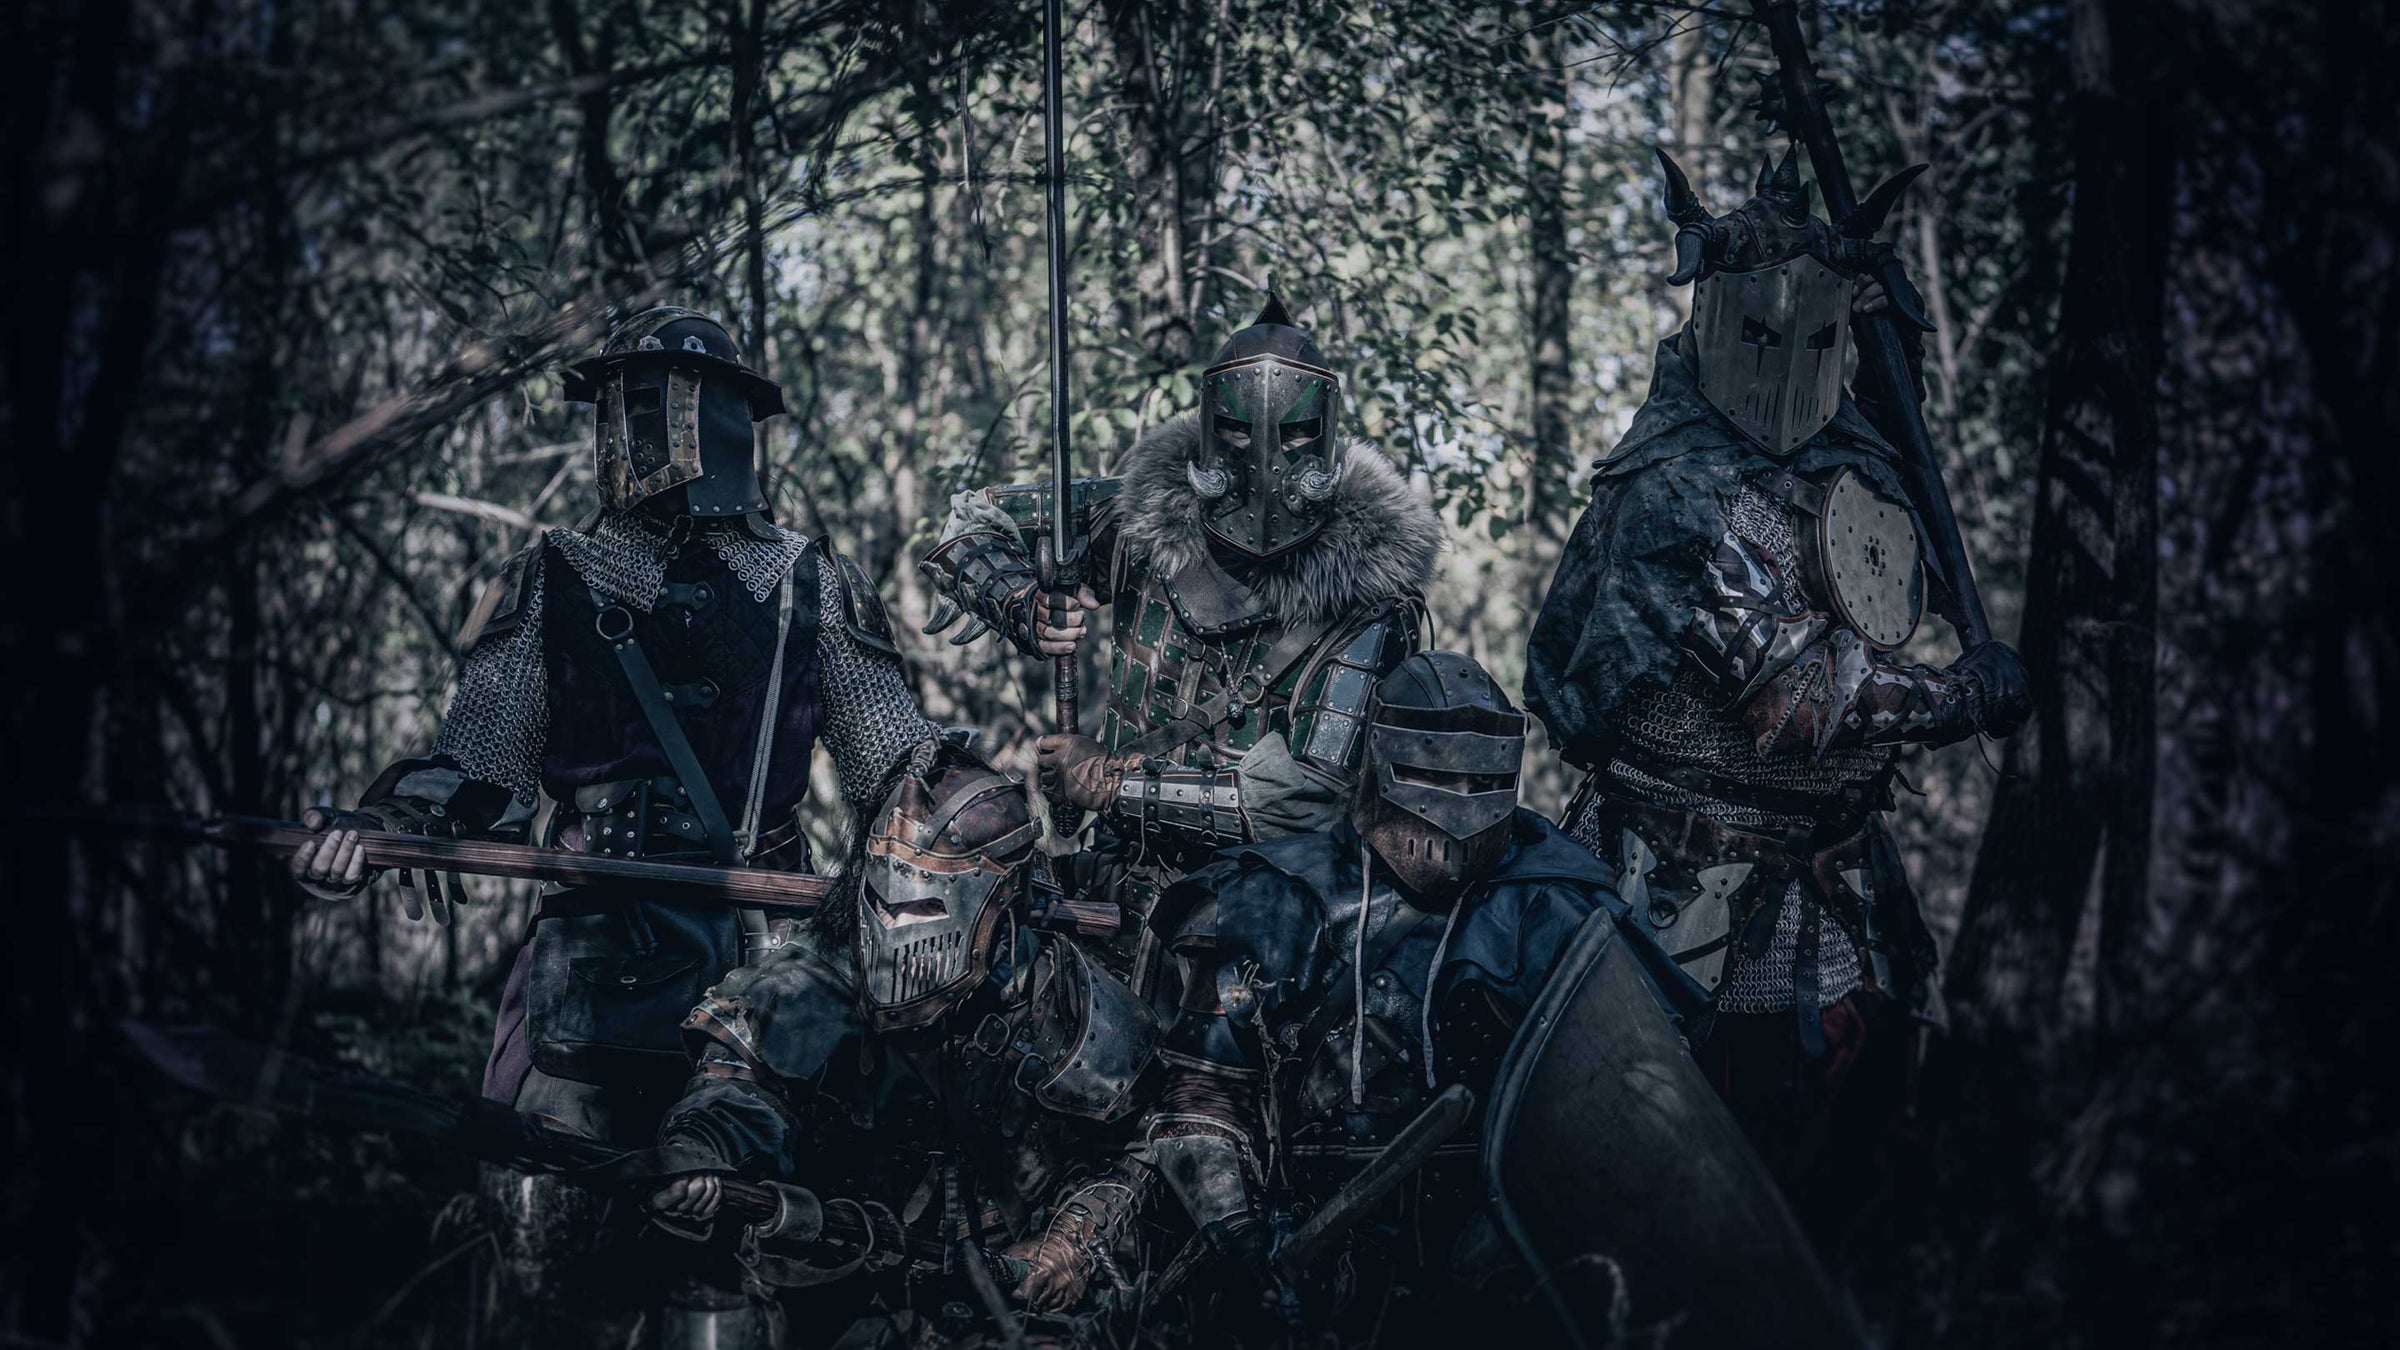 banner with 5 warriors with custom larp armor in leather and metal with a epic pose